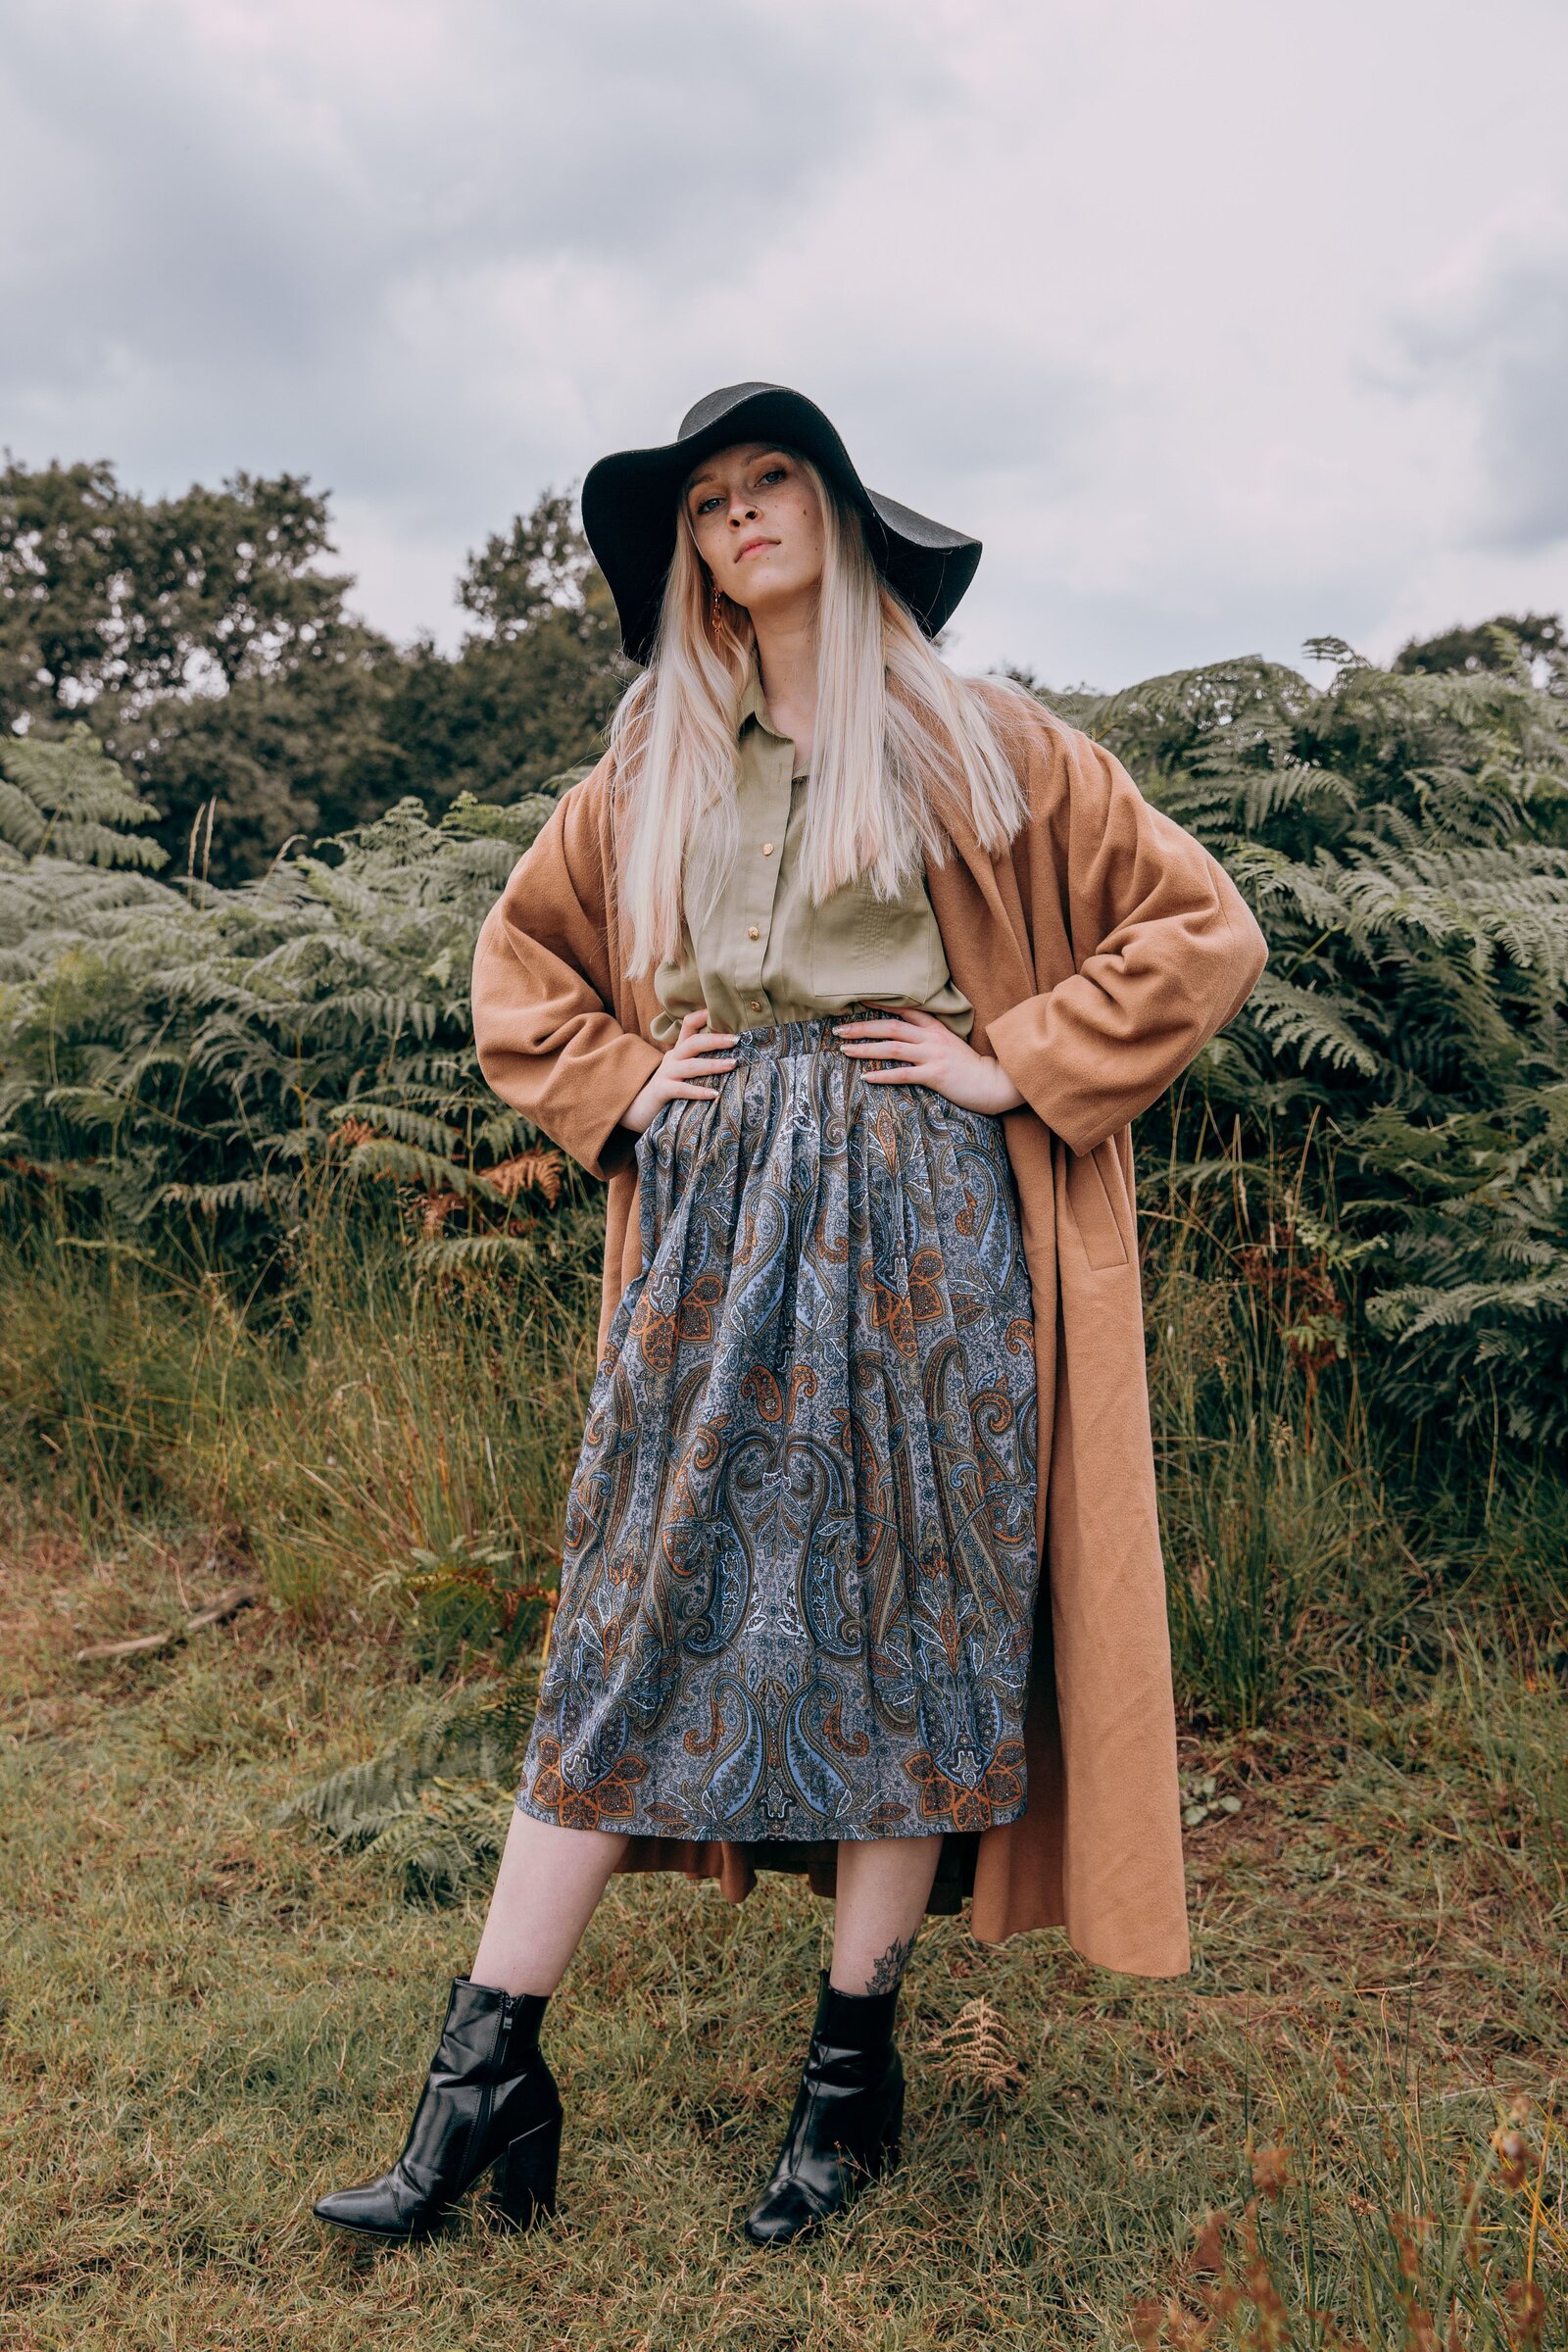 Amber wearing a long brown coat and a blue skirt against a backdrop of ferns in Richmond Park